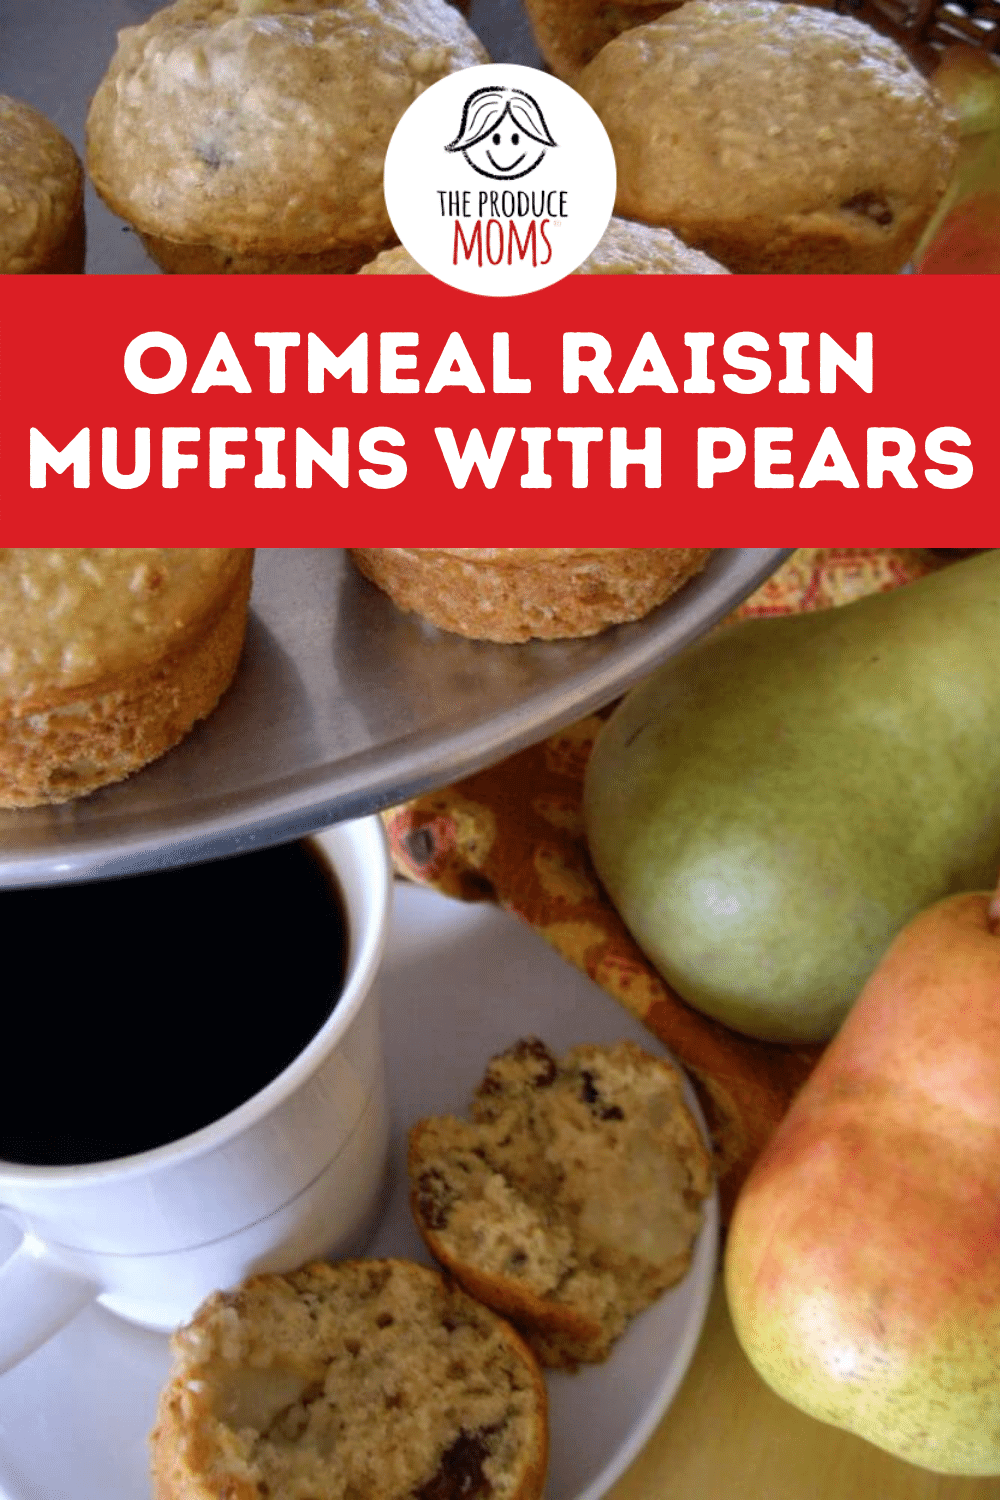 Oatmeal Raisin Muffins with Pears 